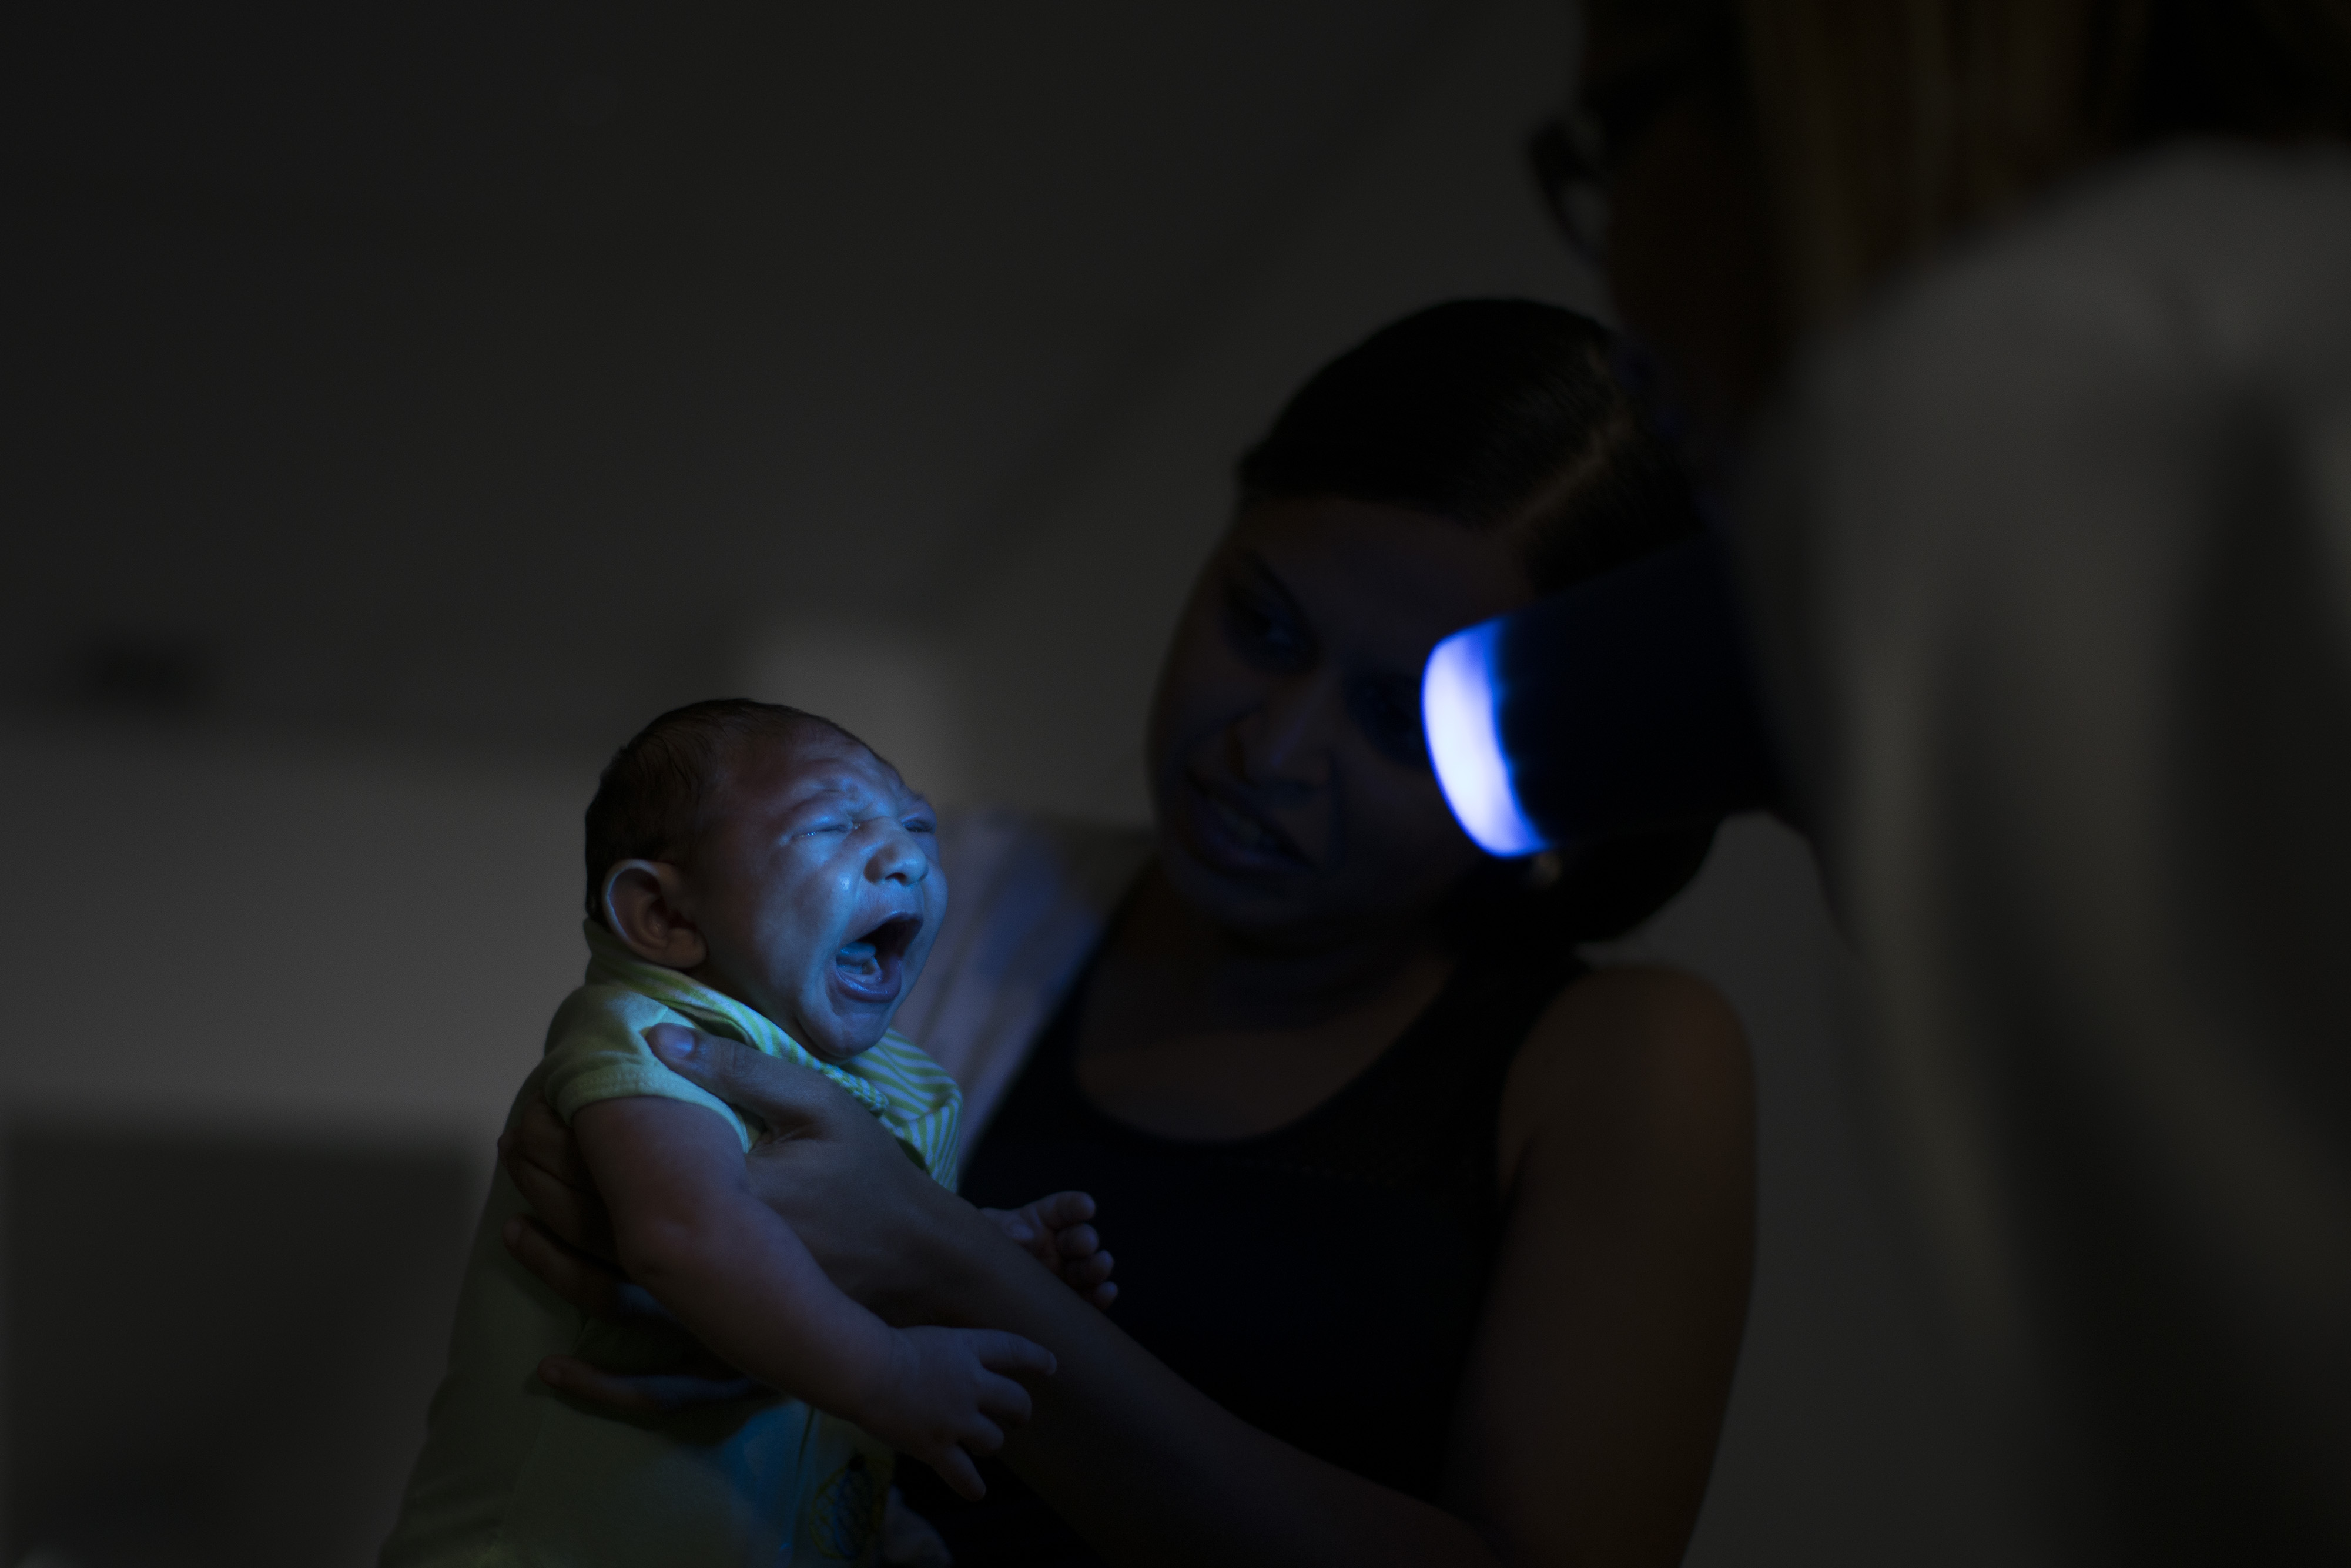 In this Thursday, Jan. 28, 2016 photo, Daniele Ferreira dos Santos holds her son Juan Pedro as he undergoes visual exams at the Altino Ventura foundation in Recife, Pernambuco state, Brazil. Santos was never diagnosed with Zika, but she blames the virus for her son’s defect and for the terrible toll it has taken on her life. (AP Photo/Felipe Dana)